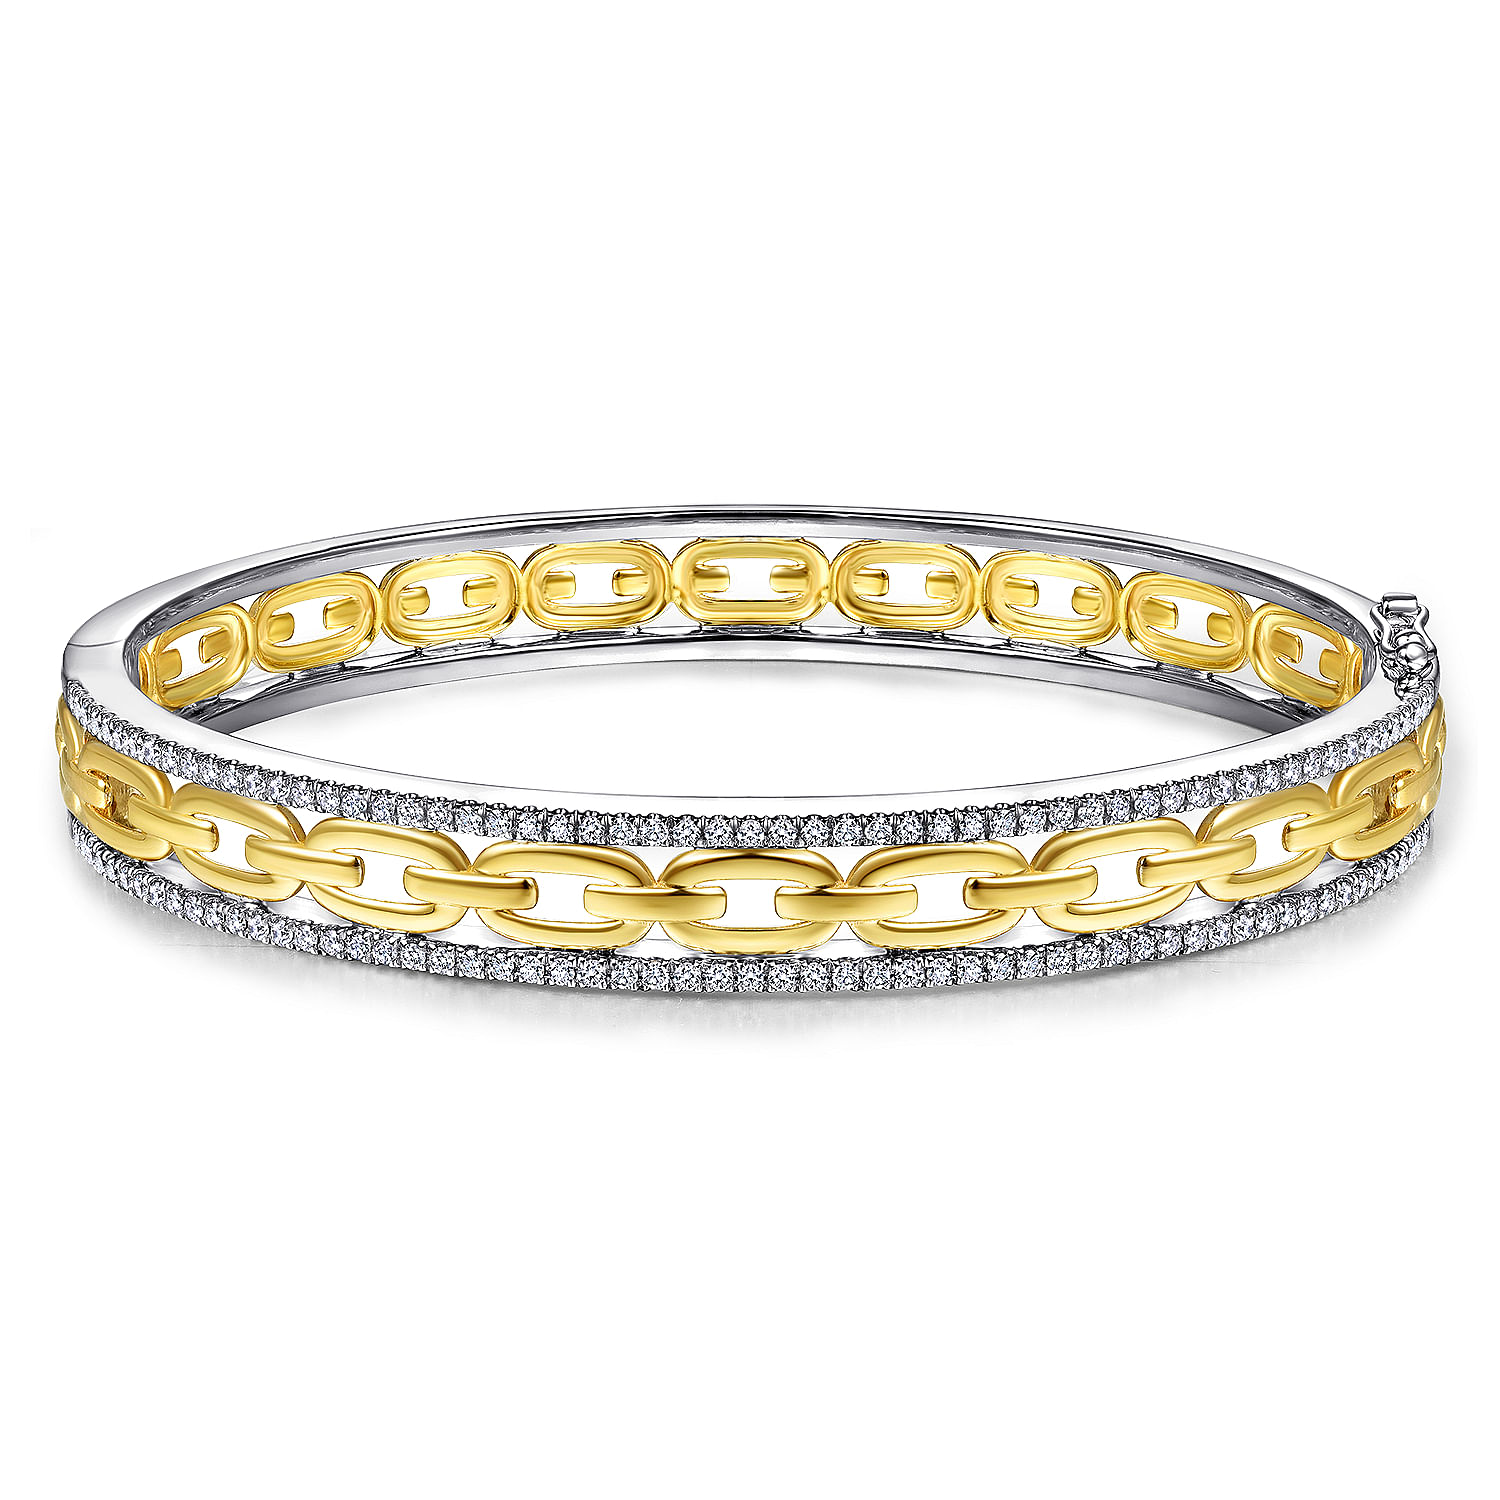 14K White and Yellow Gold Chain Link Bangle with Diamond Frame